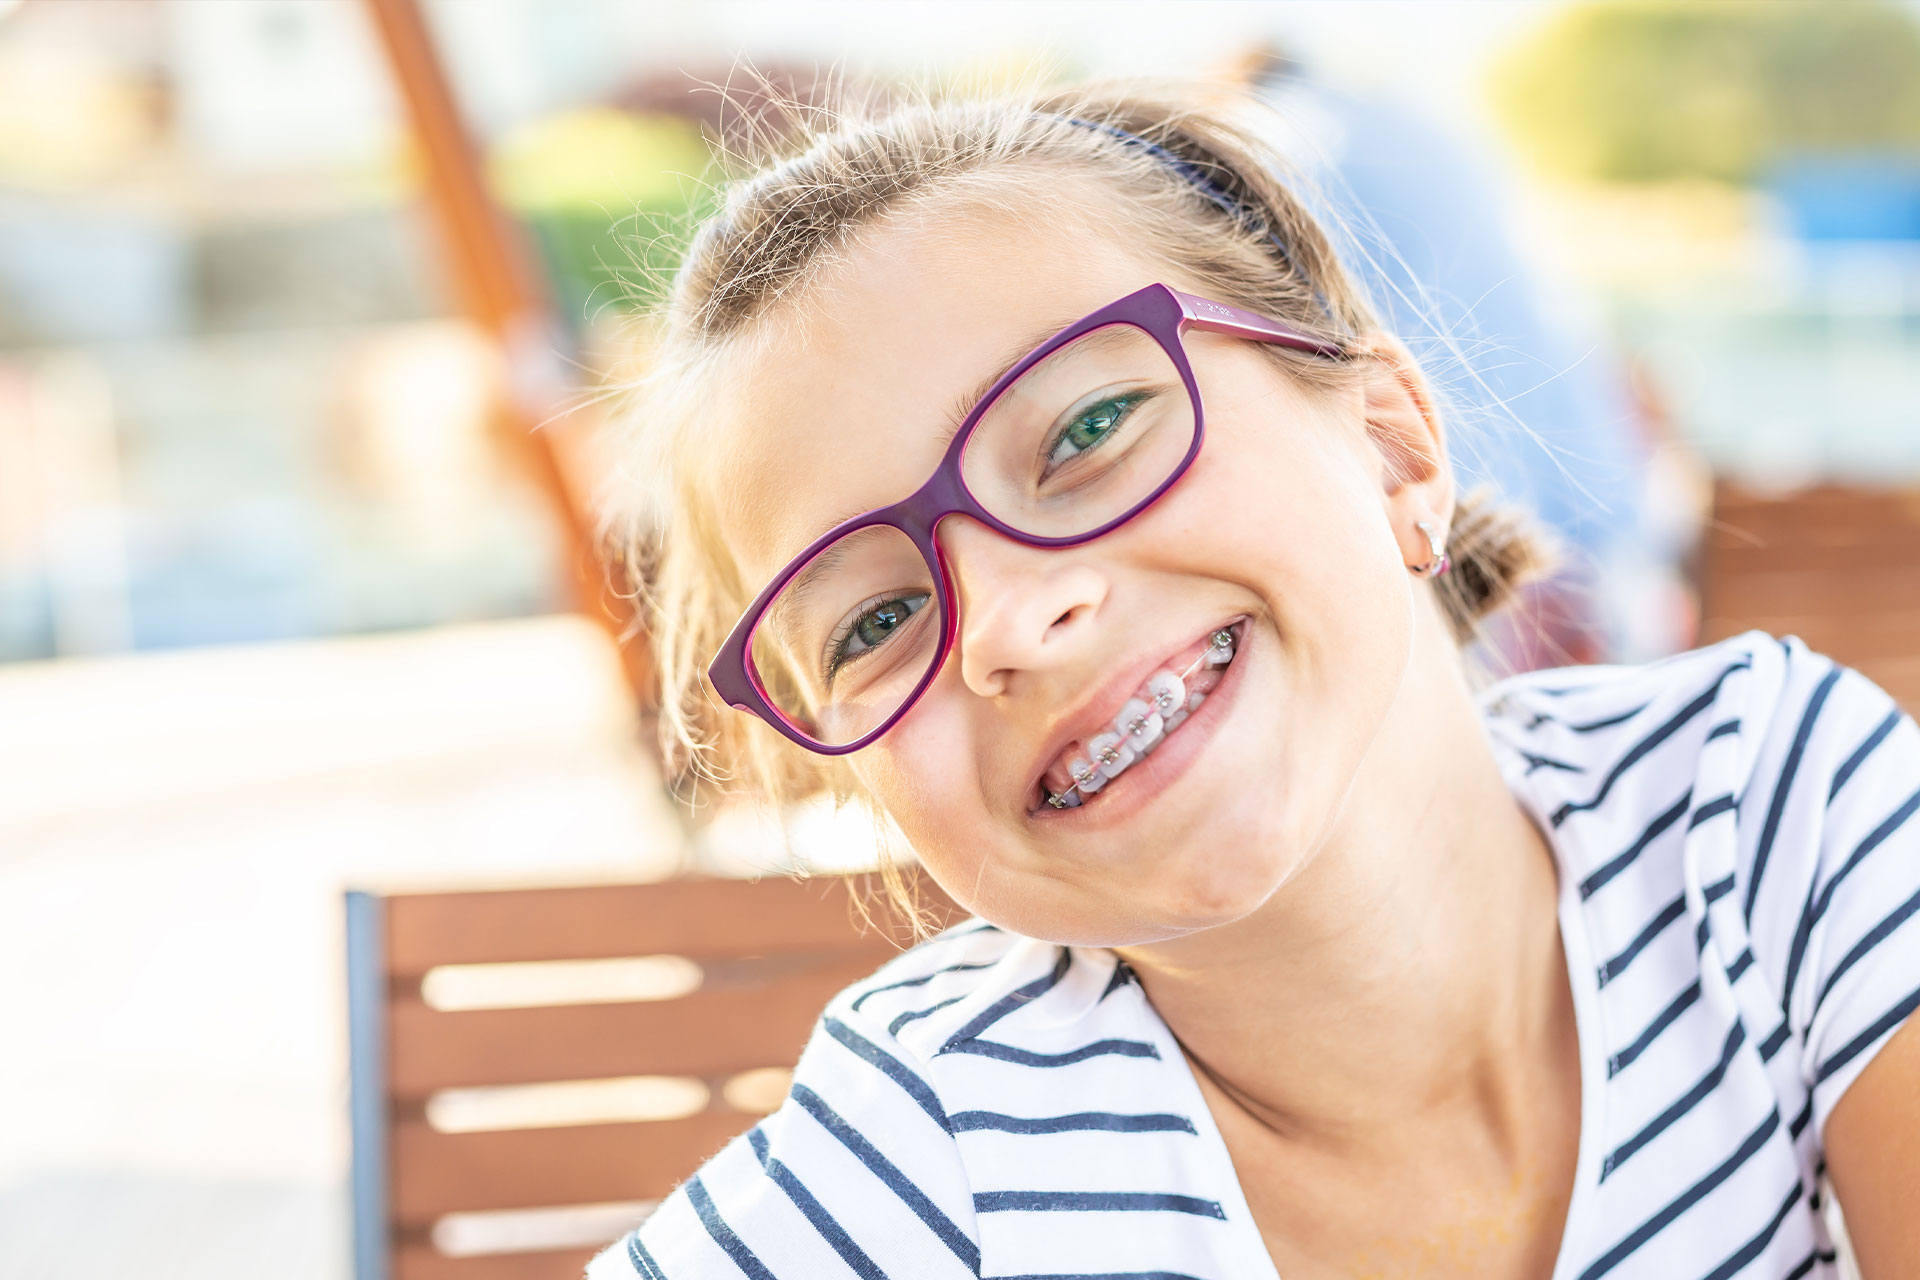 Girl in purple glasses smiling at camera, seated outdoors.